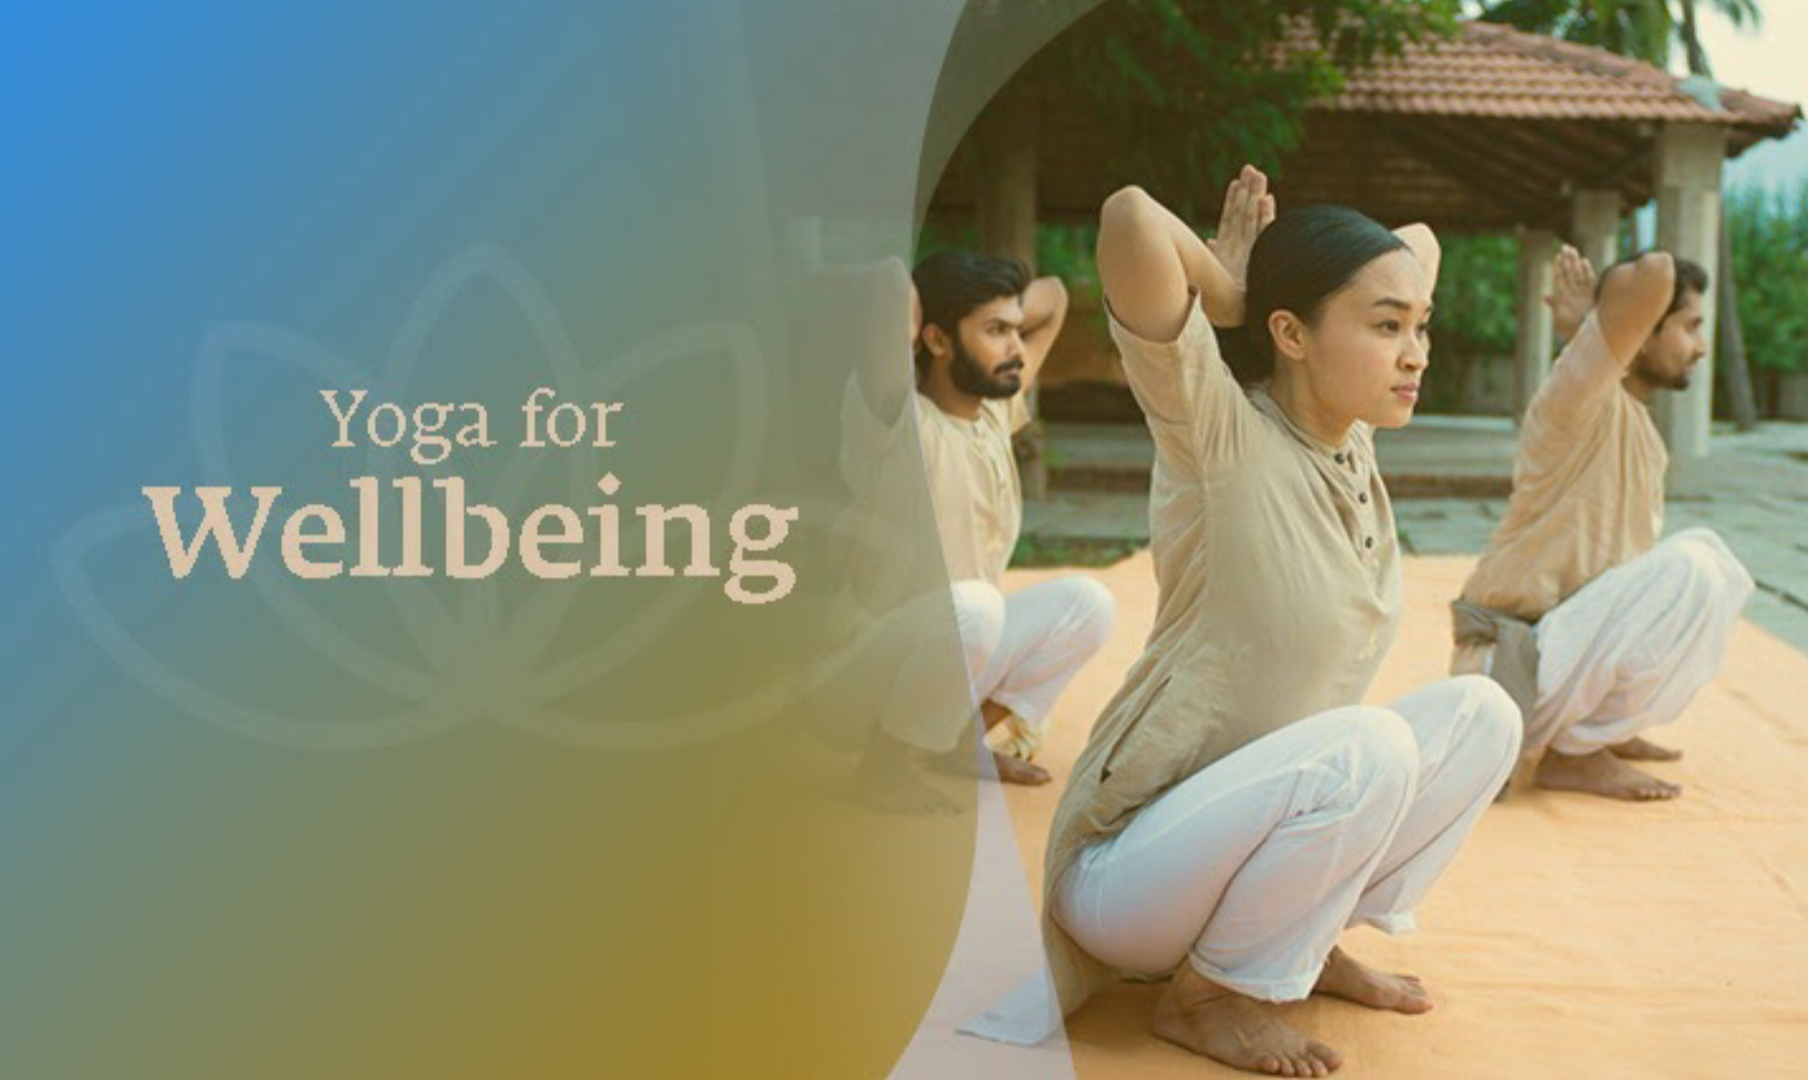 Yoga for Wellbeing, Dallas, Texas, United States